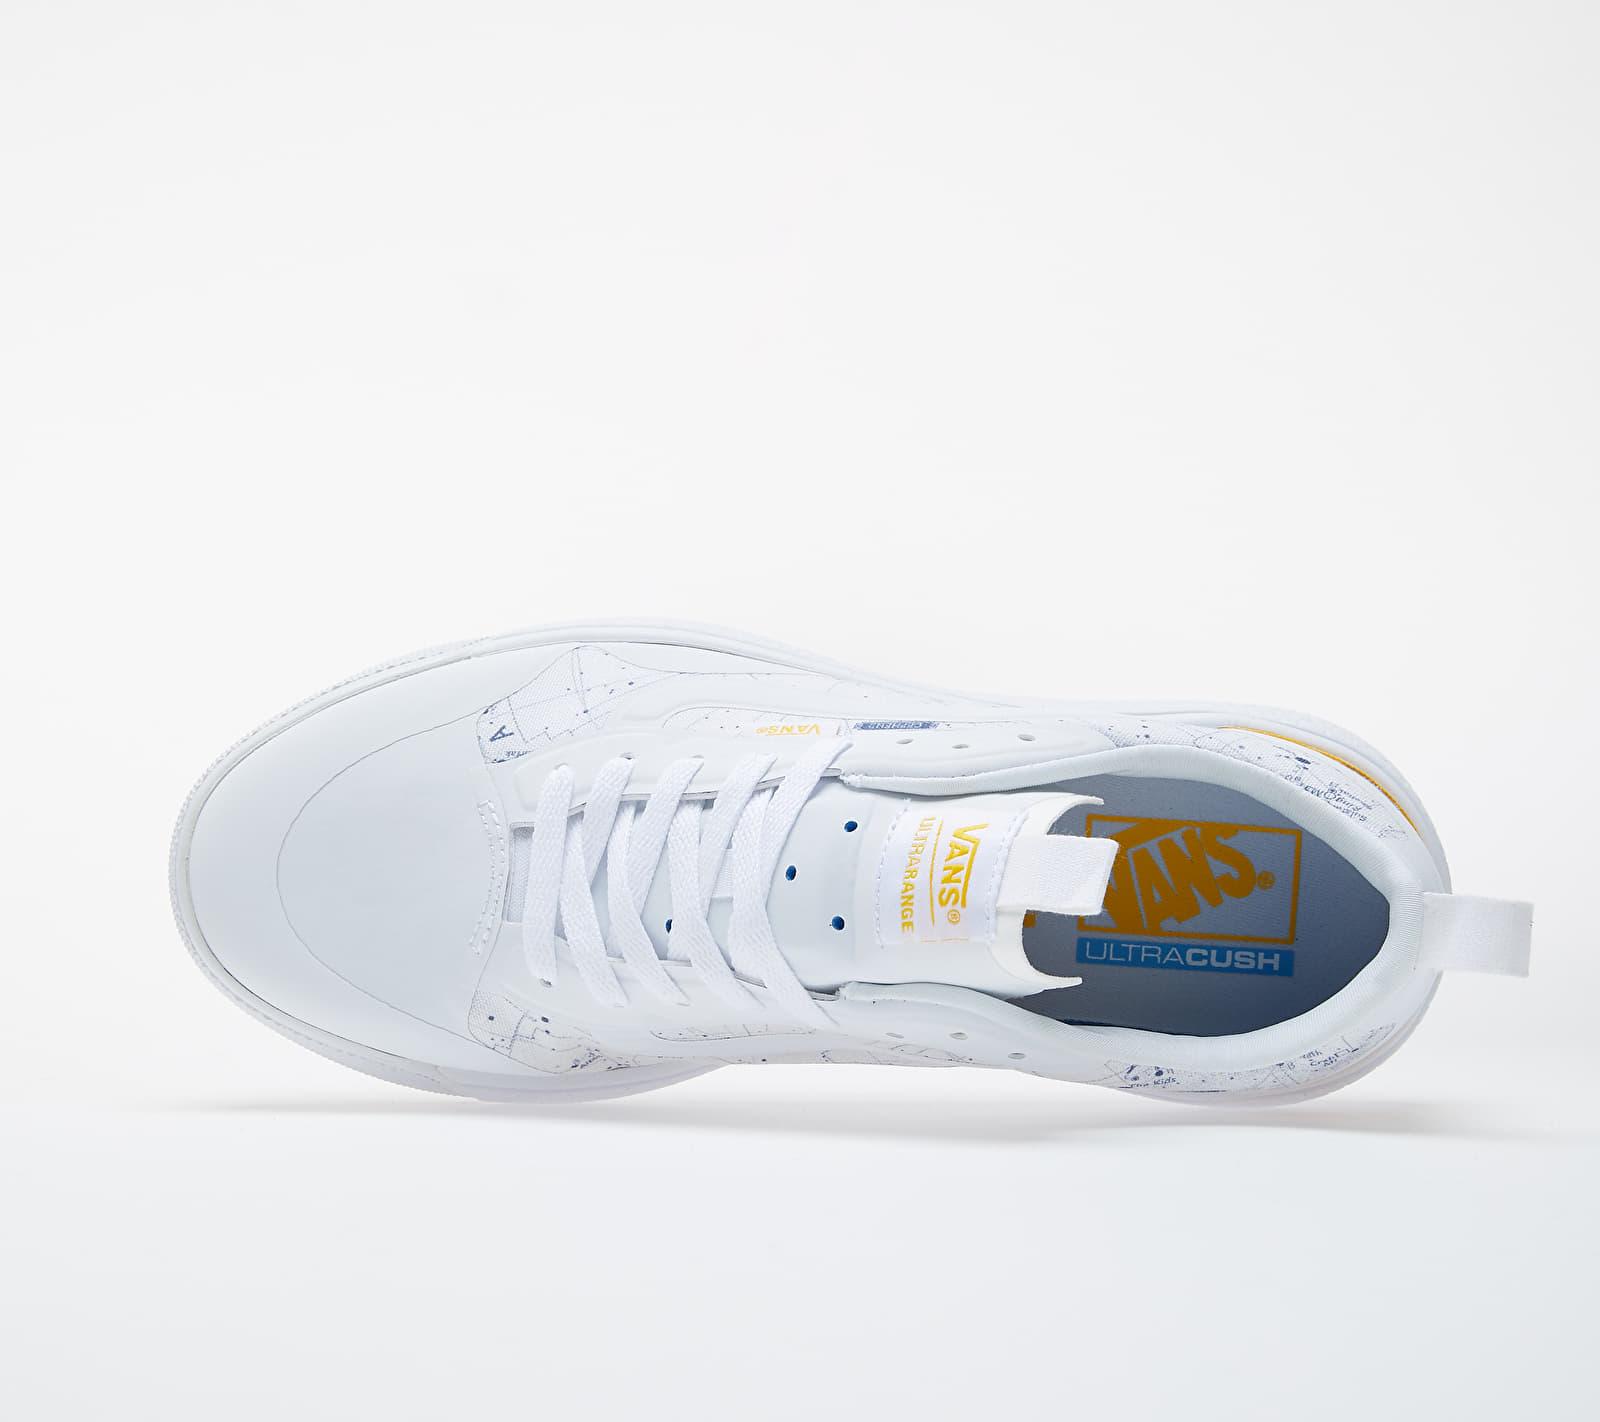 Vans X National Geographic Ultrarange Exo Shoes in White | Lyst